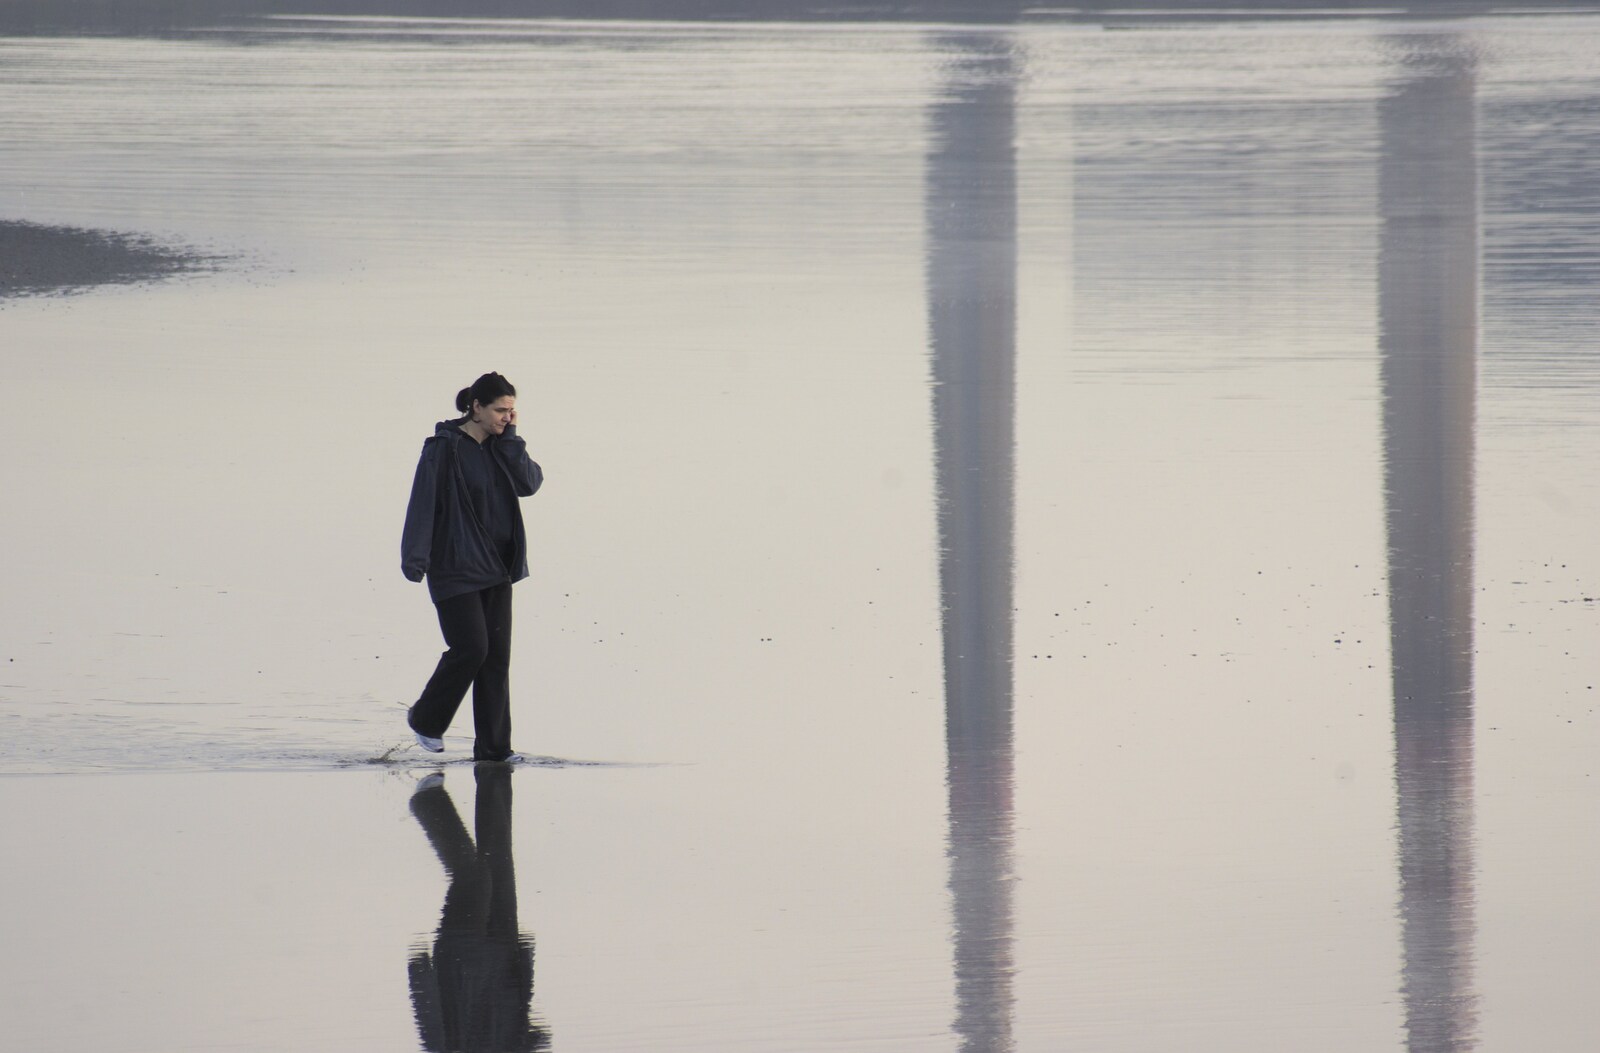 A woman on her mobile phone: 'I'M ON THE SEA' from A Week in Monkstown, County Dublin, Ireland - 1st March 2011